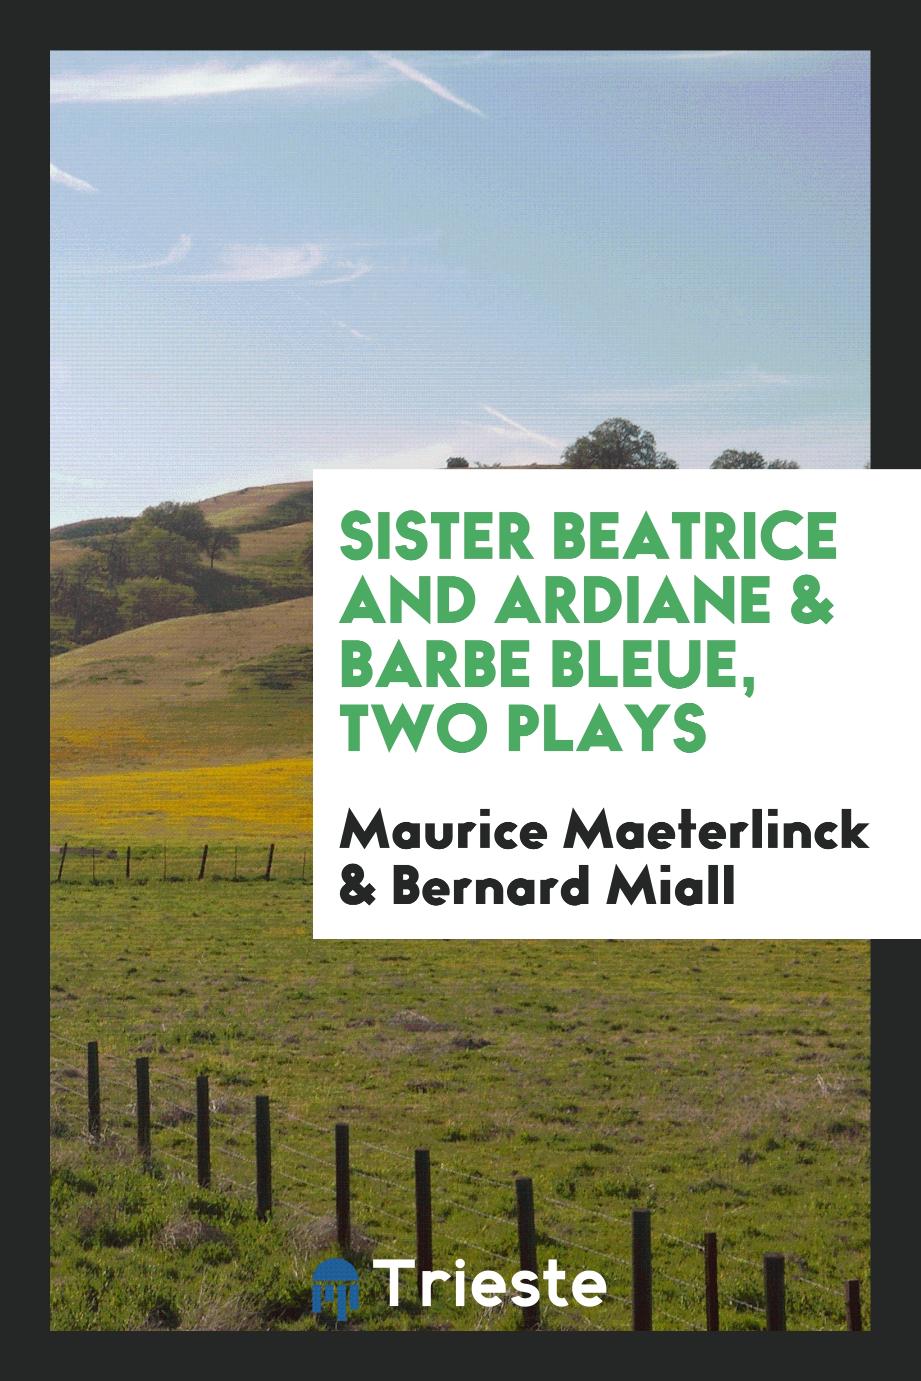 Sister Beatrice and Ardiane & Barbe Bleue, Two Plays